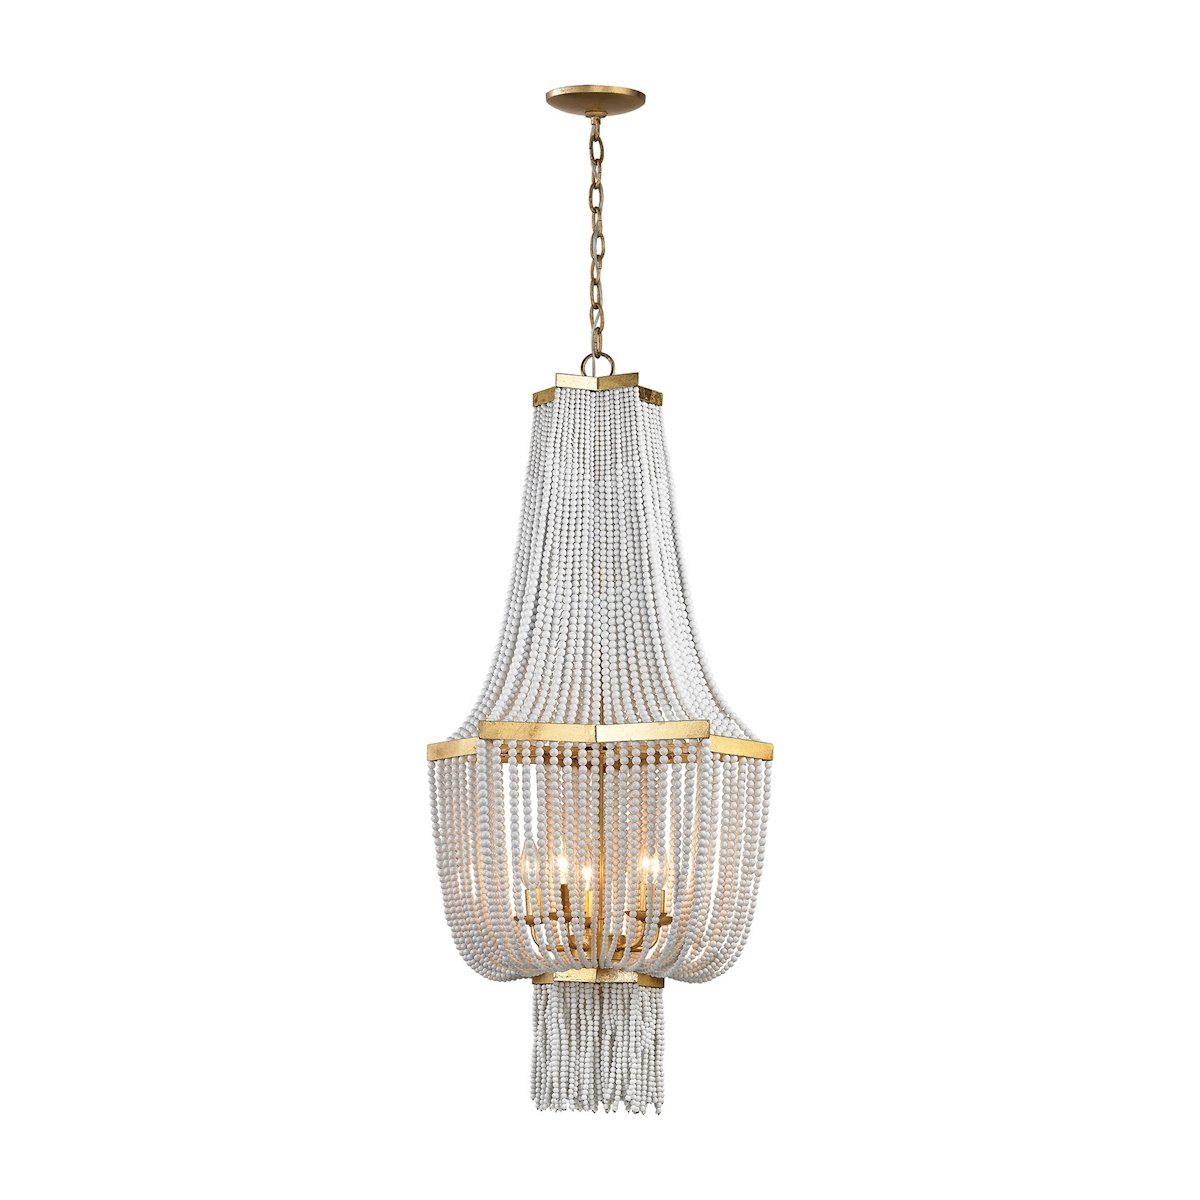 Chaumont 5 Light Chandelier In Antique Gold Leaf Ceiling Dimond Lighting 